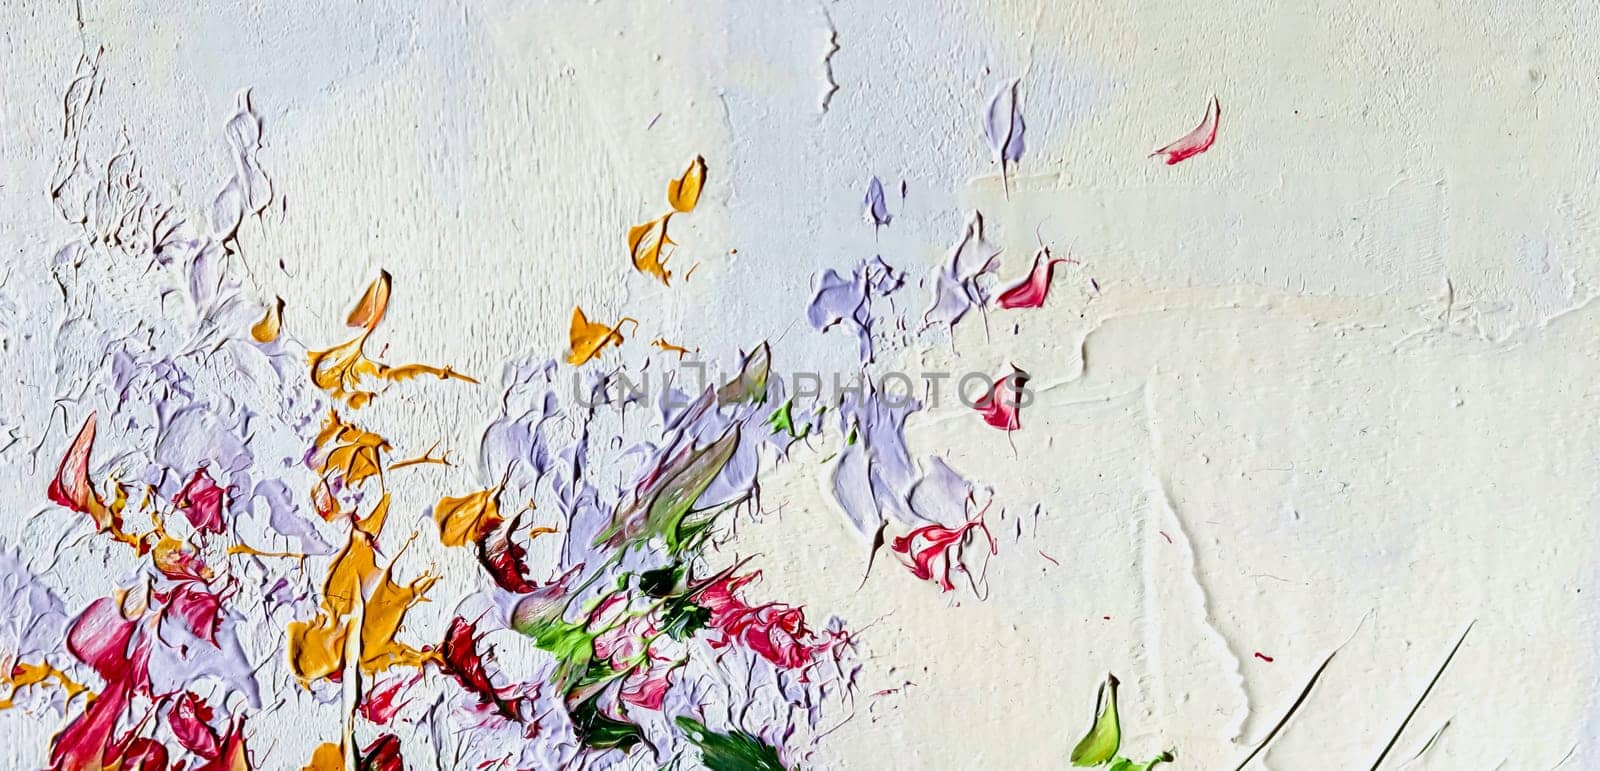 Abstract background - oil painting on canvas with flowers and paint strokes by Olayola